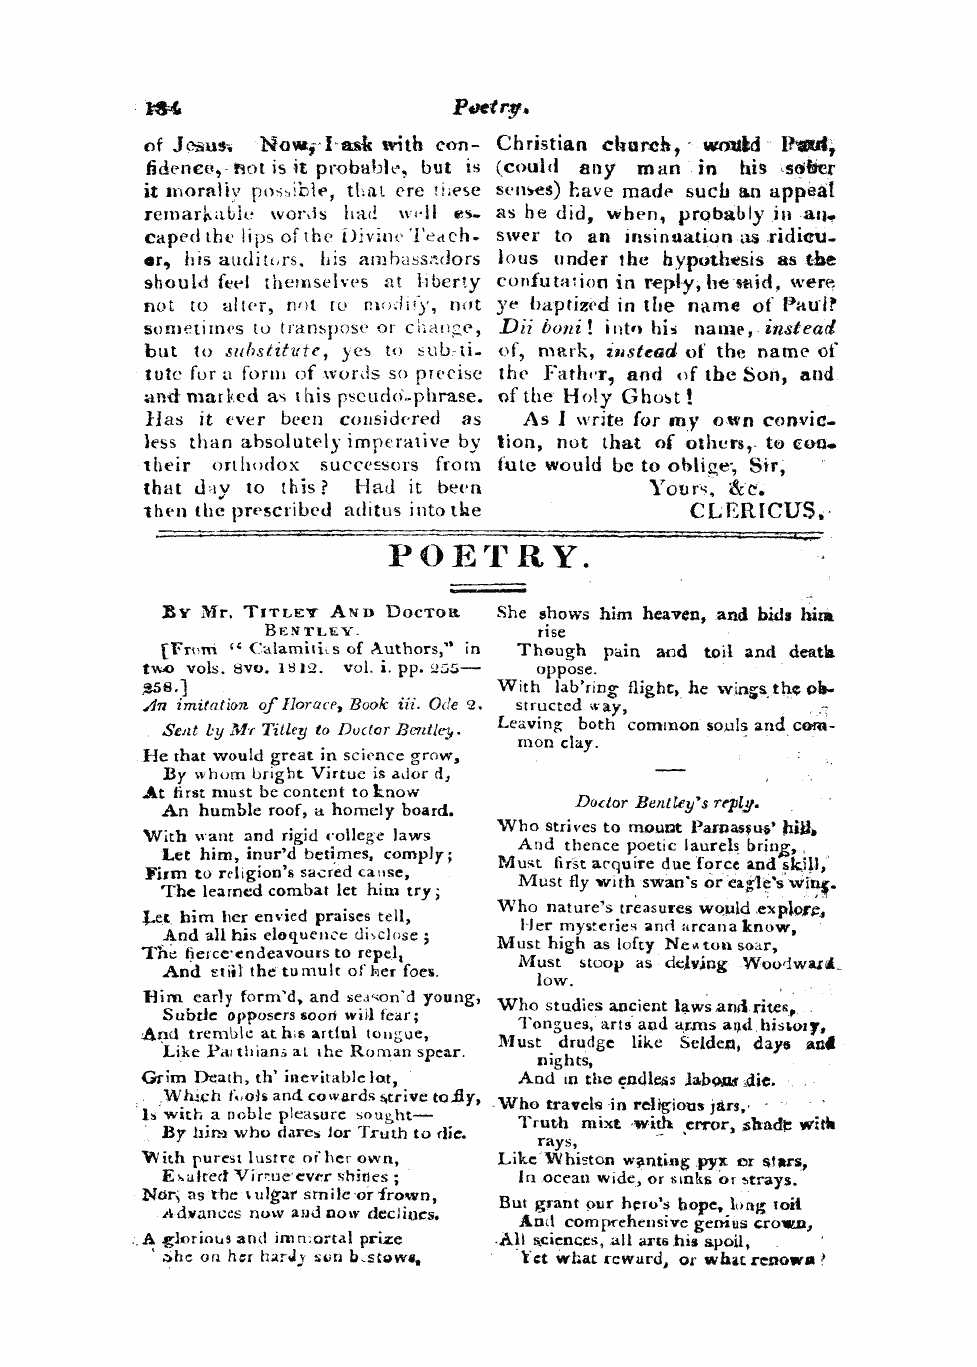 Monthly Repository (1806-1838) and Unitarian Chronicle (1832-1833): F Y, 1st edition - Poetry.